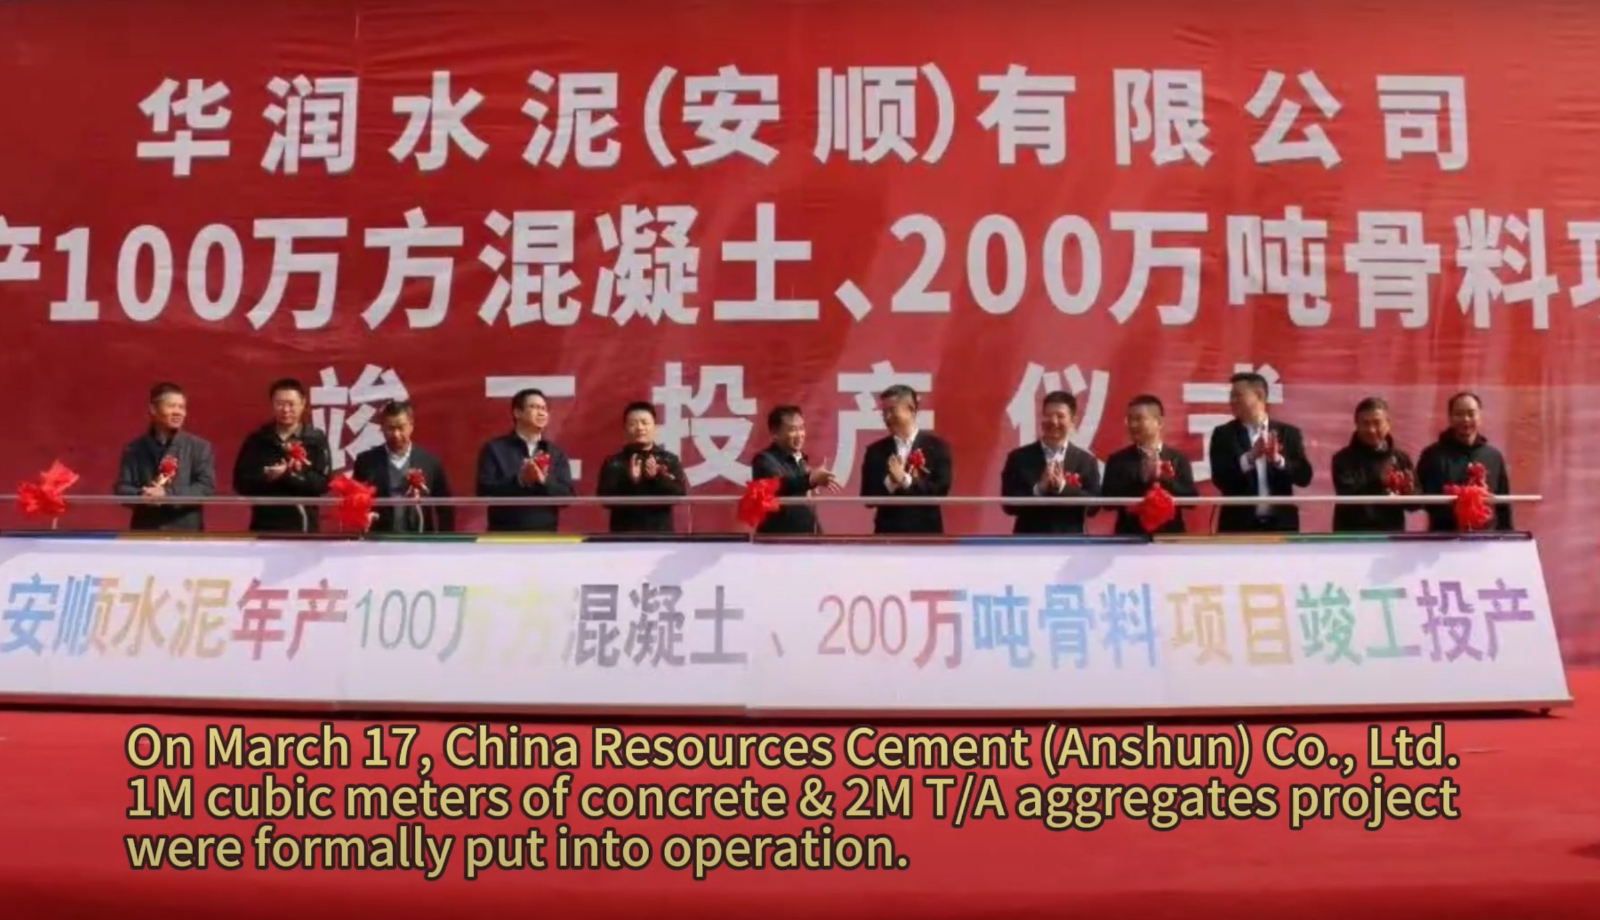 NMS Equipment Supports CR Cement Anshun Project’s Successful Operation